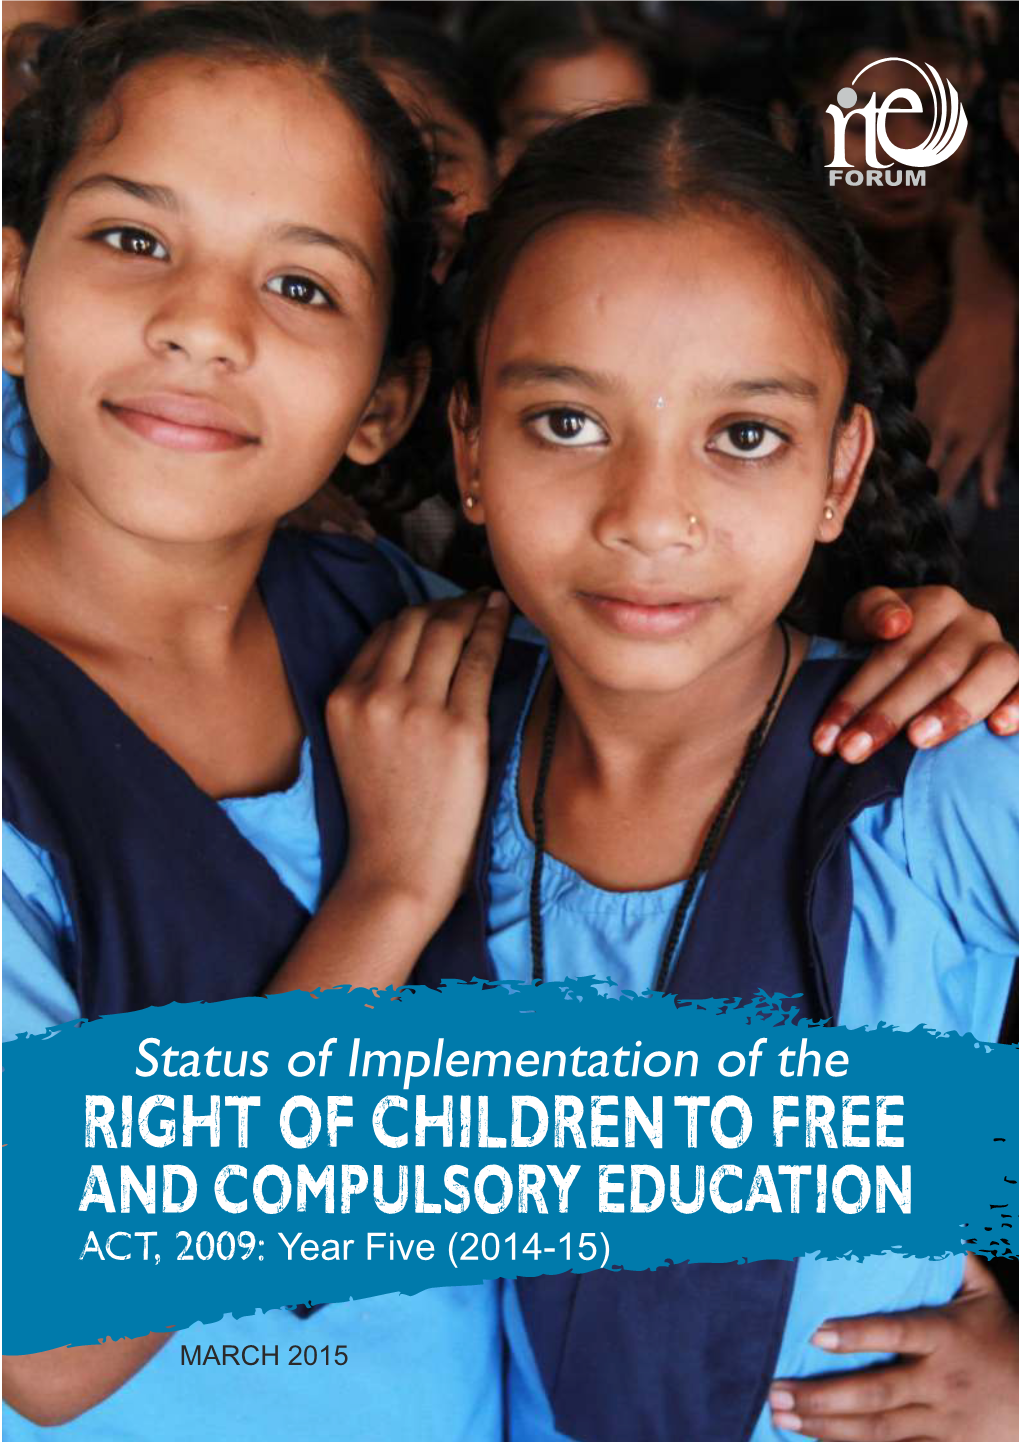 Status of Implementation of the Right of Children to Free and Compulsory Education Act, 2009: Year Five (2014-15)